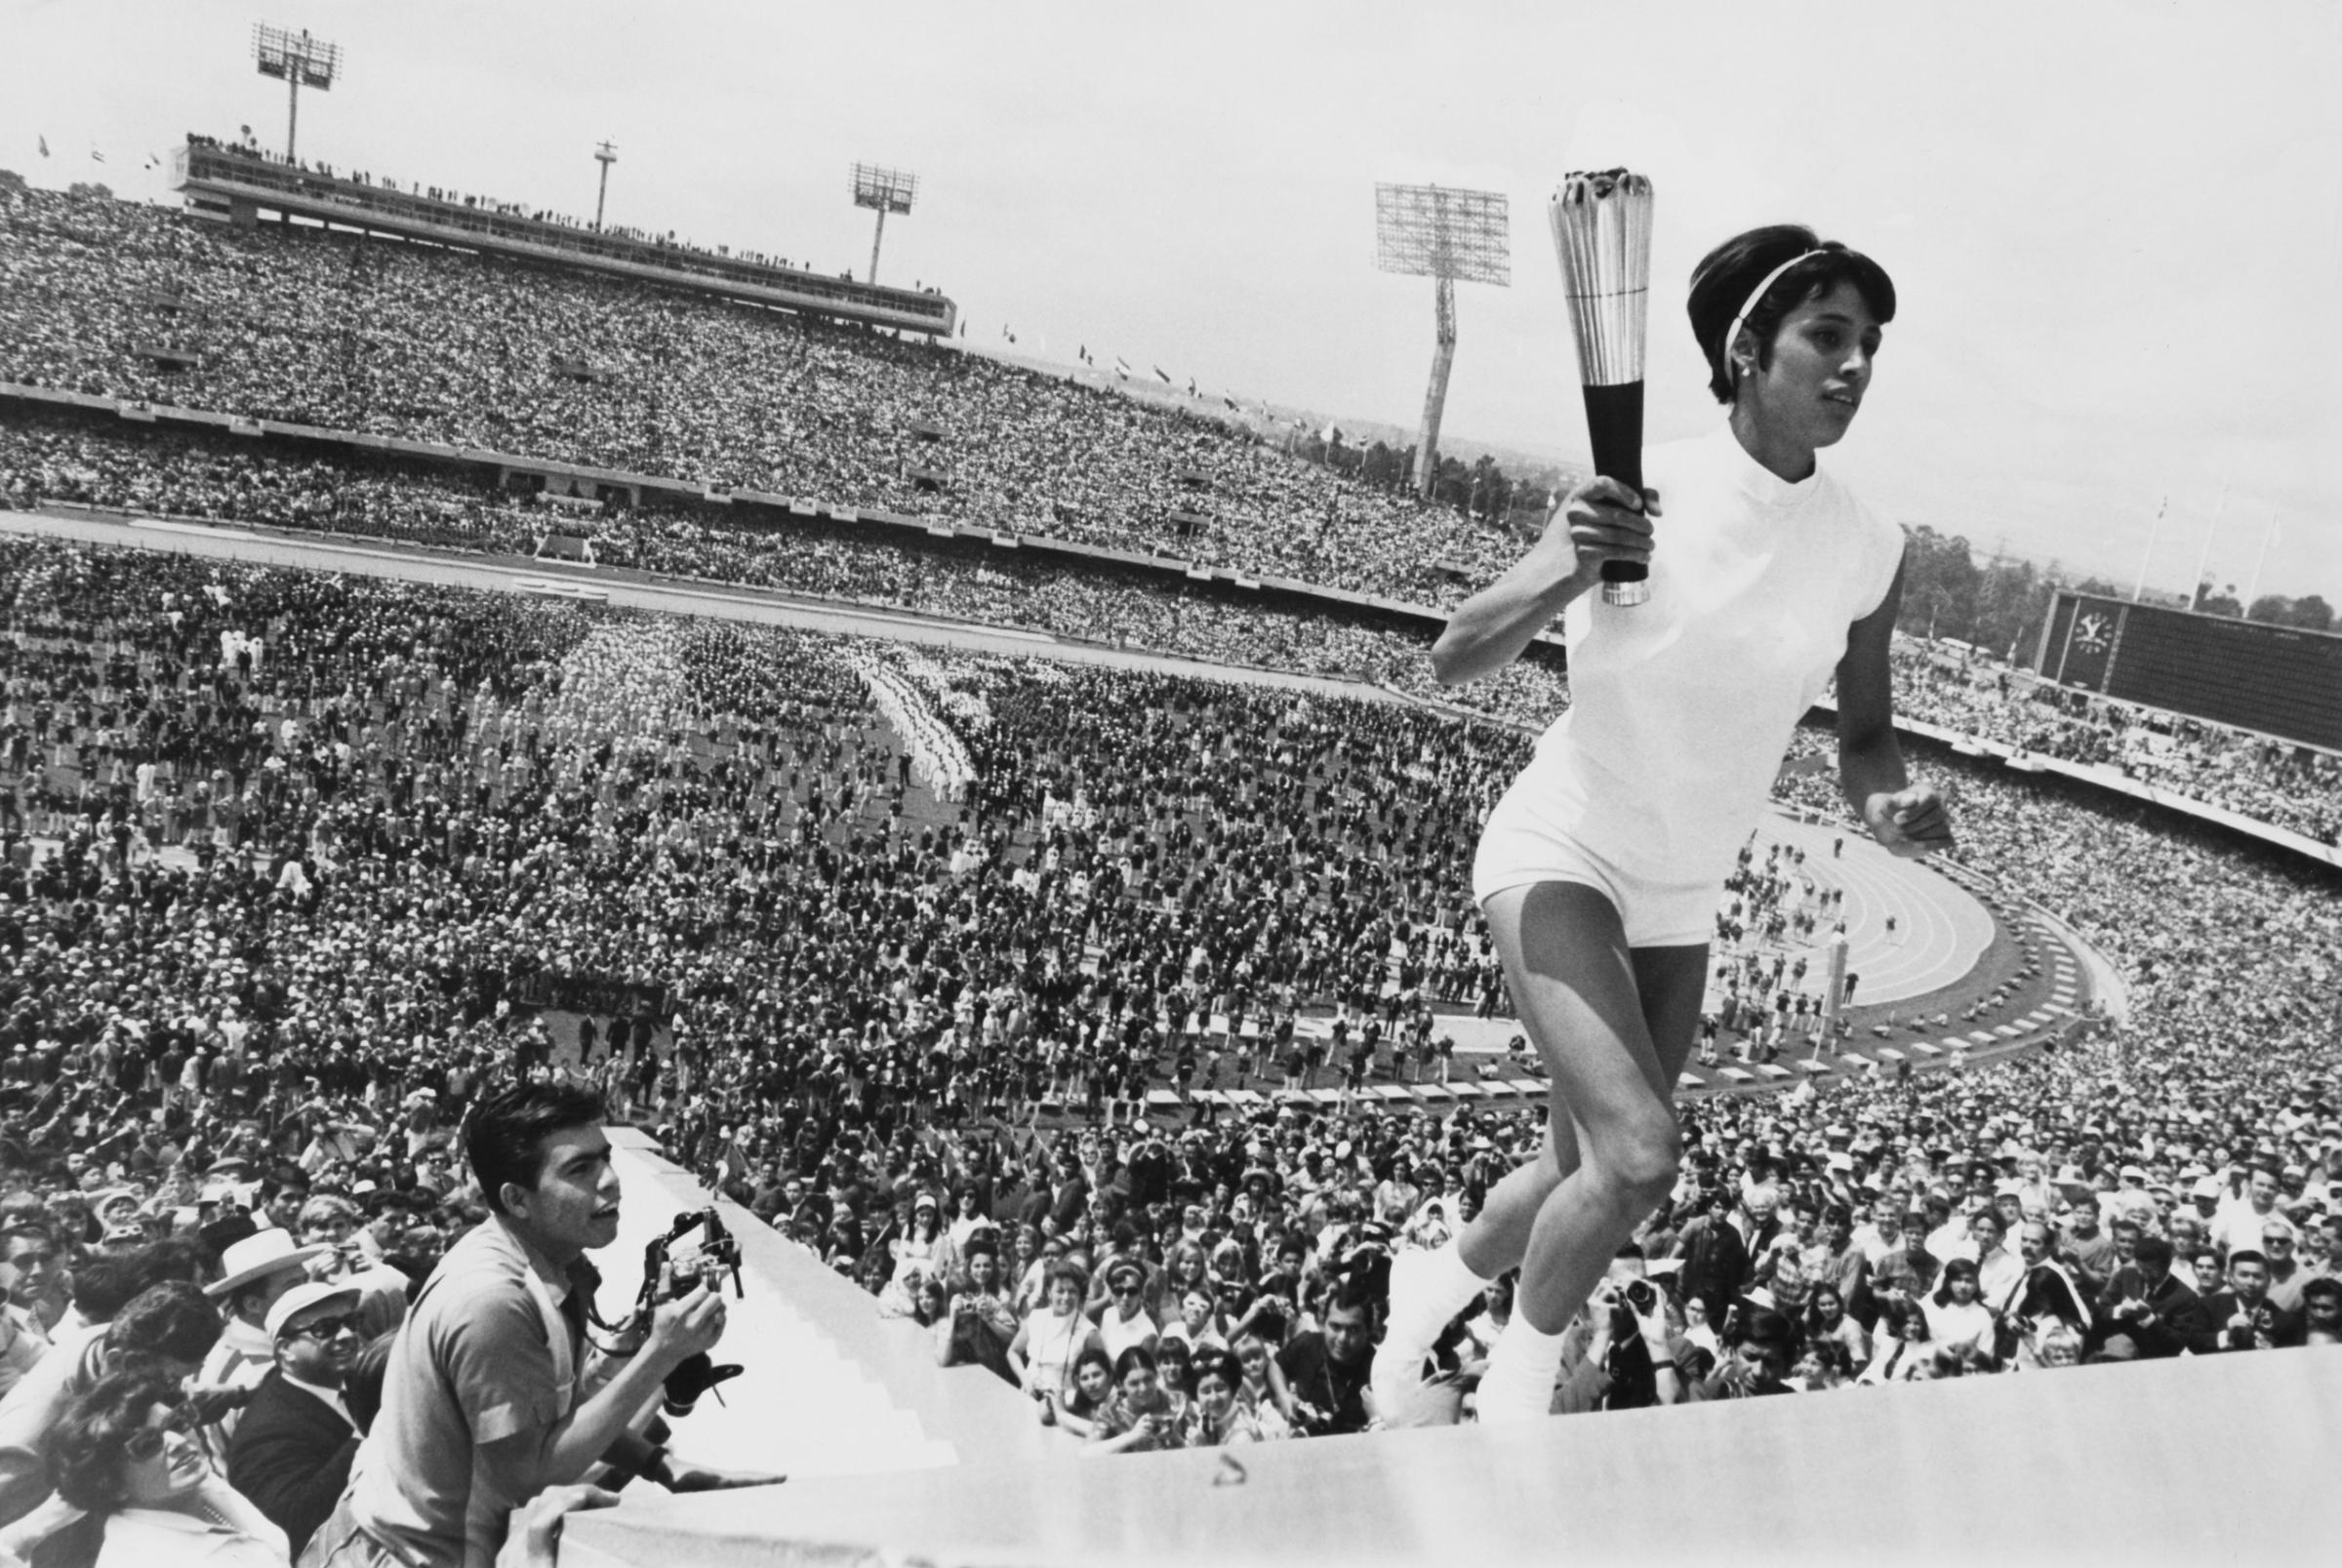 Lighting The Olympic Flame 1968, by Enriqueta Basilio